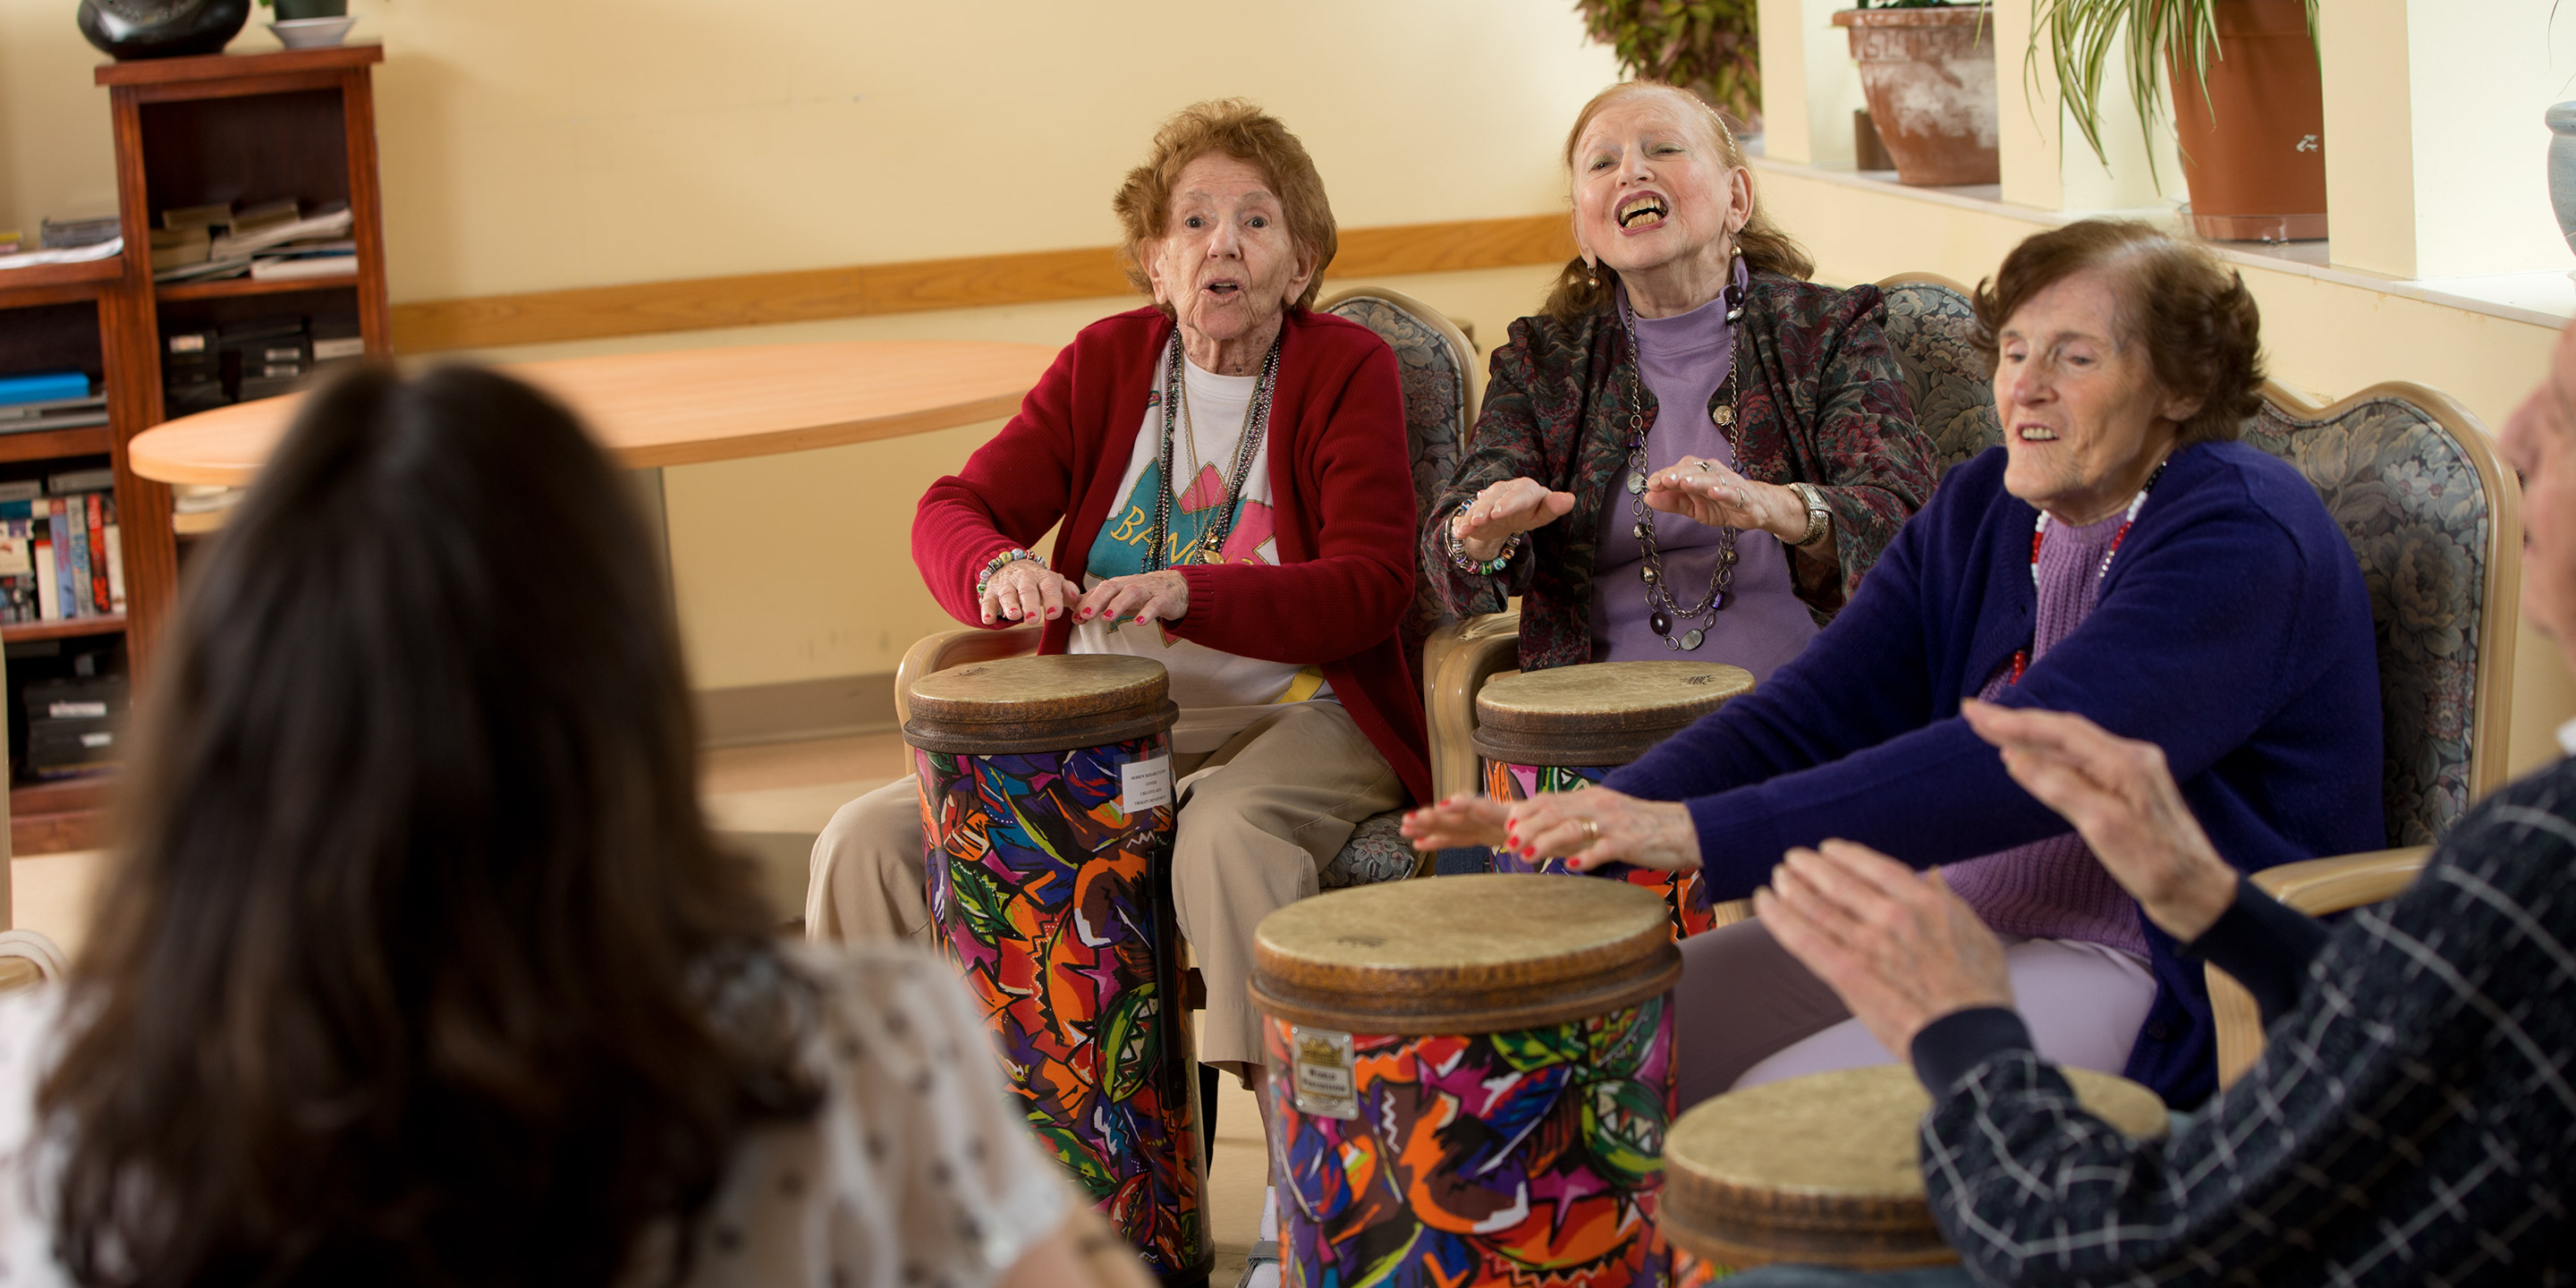 Residents at Hebrew SeniorLife participate in a music therapy activity involving drums